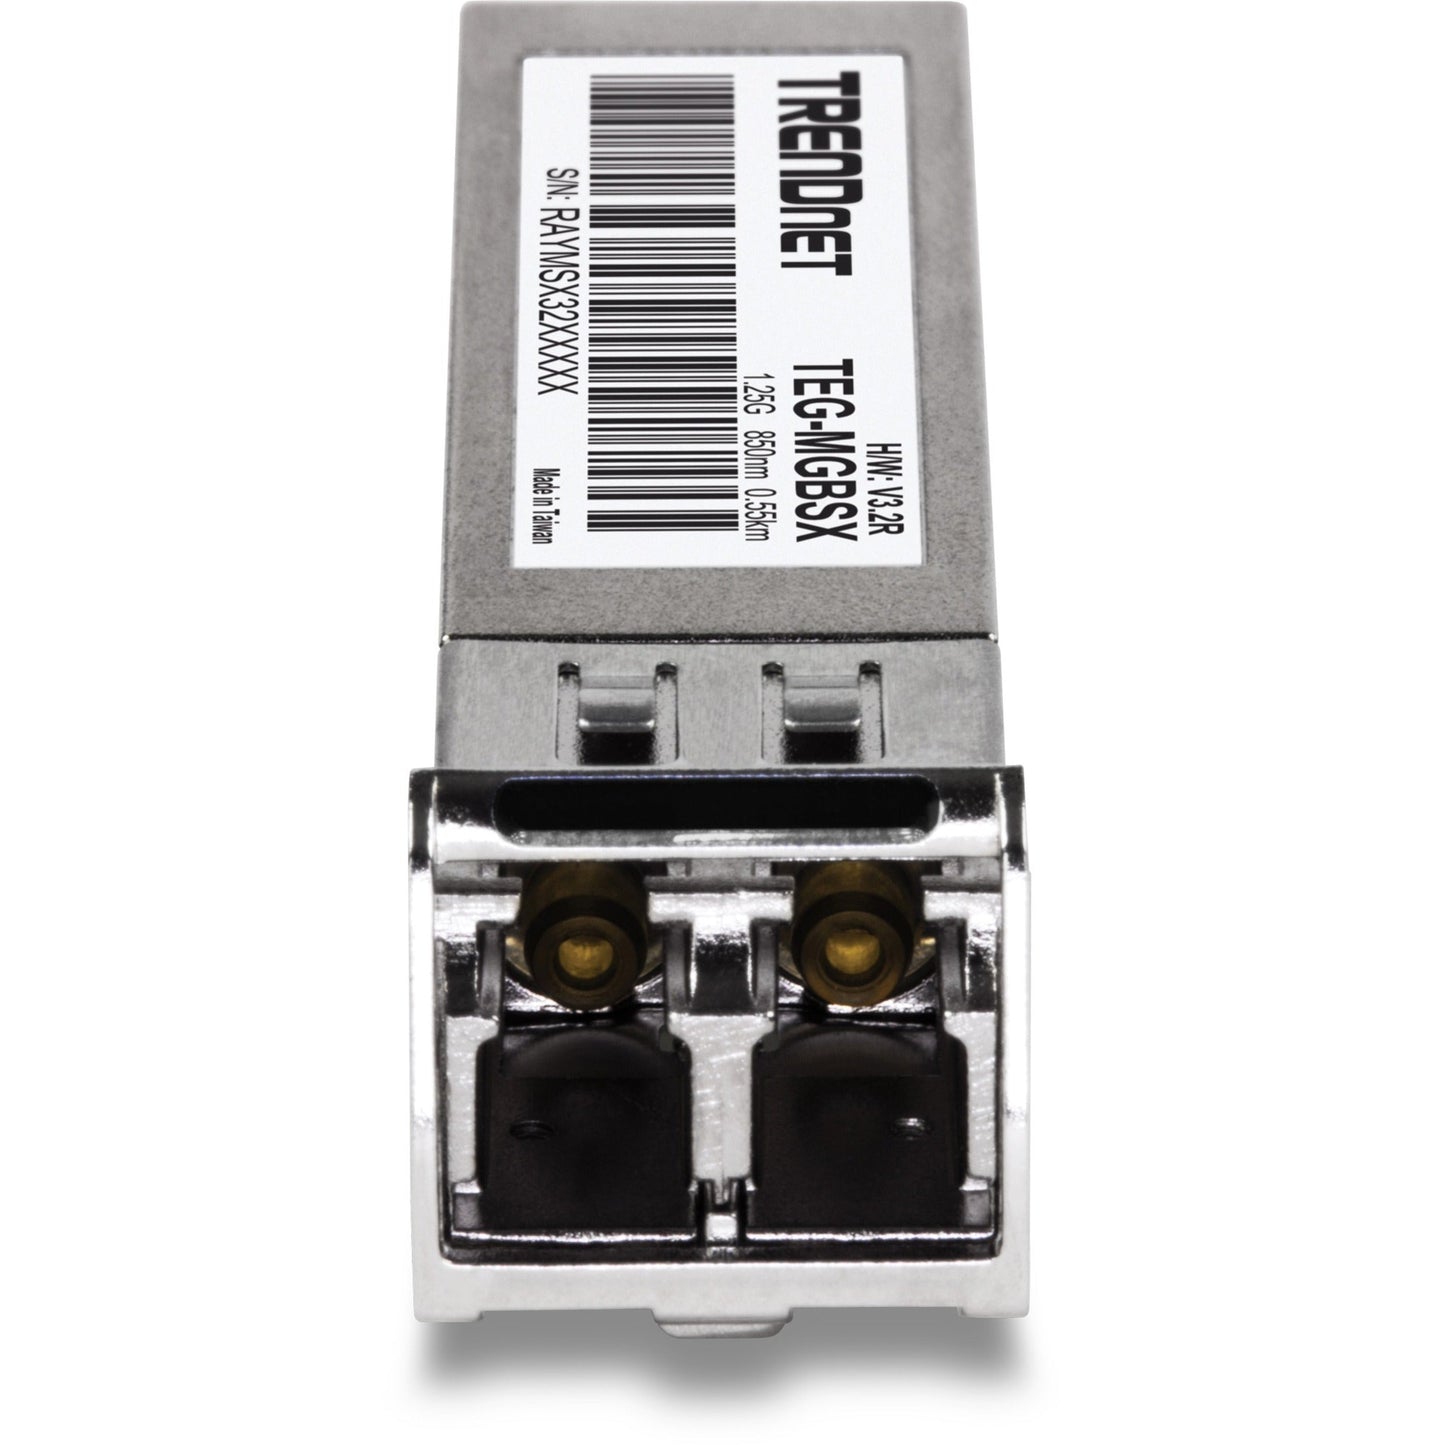 TRENDnet SFP Multi-Mode LC Module Up To 550m (1800 Ft) Mini-GBIC Hot Pluggable IEEE 802.3z Gigabit Ethernet Supports Up To 1.25 Gbps Lifetime Protection Silver TEG-MGBSX